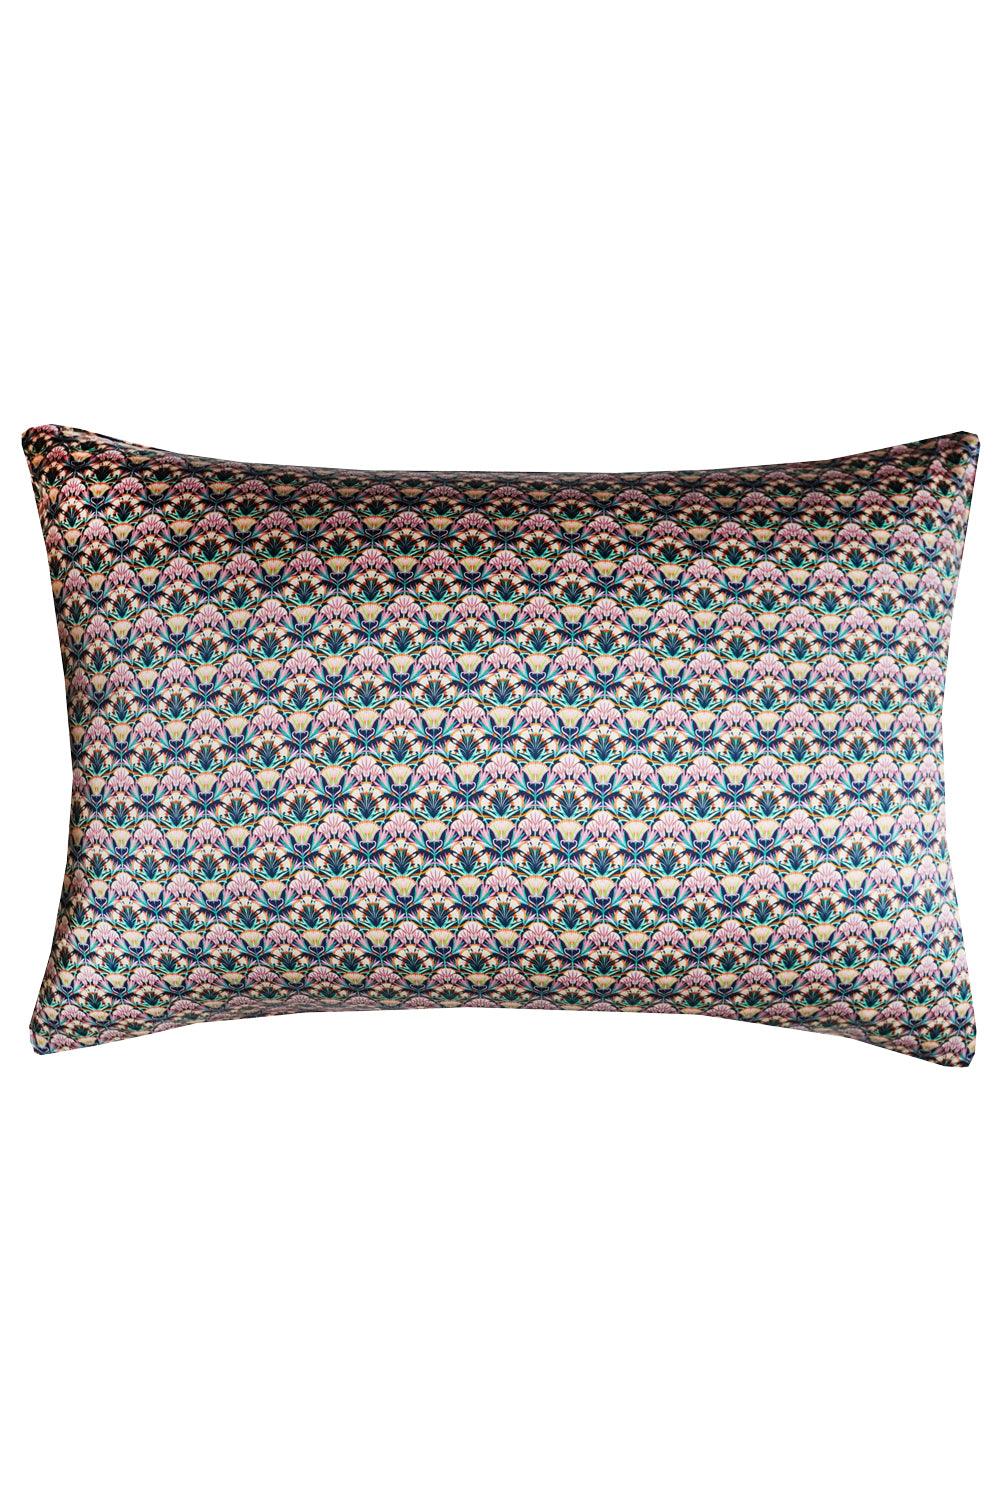 Silk Pillowcase made with Liberty Fabric LOTUS LOVE - Coco & Wolf